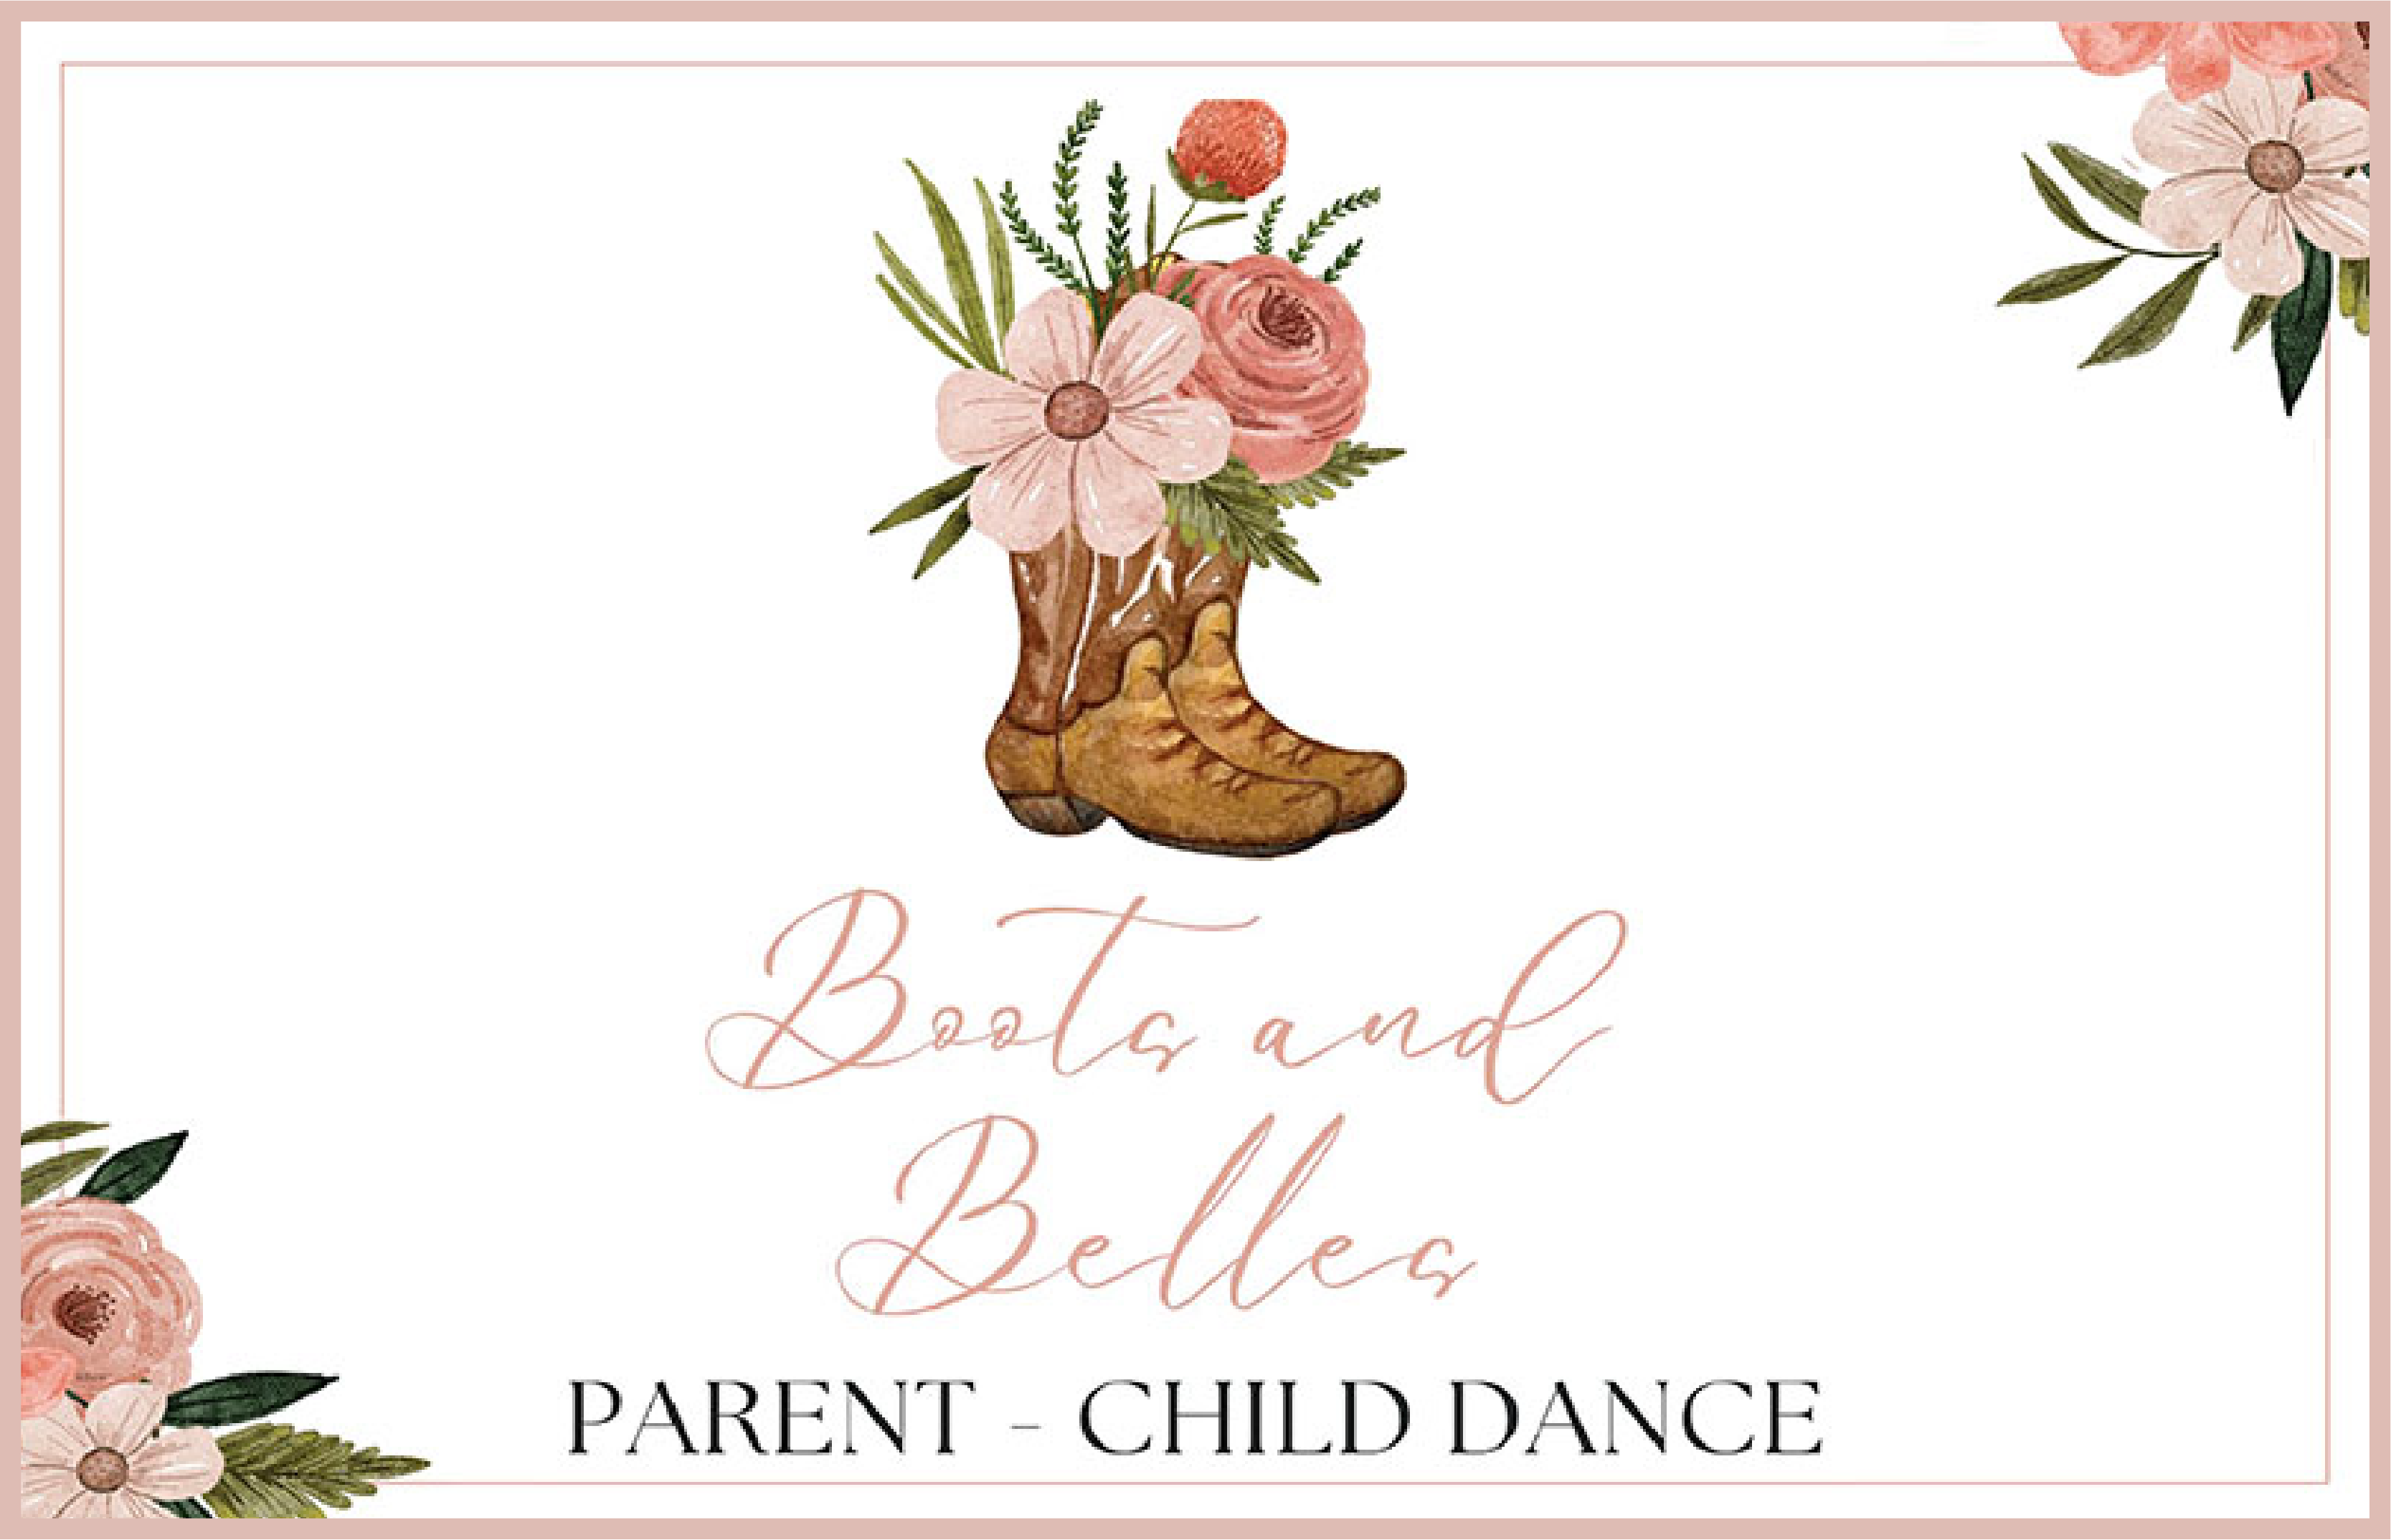 Cinco Ranch II Belles and Boots Dance: A Fun-Filled Evening for Parents and Children